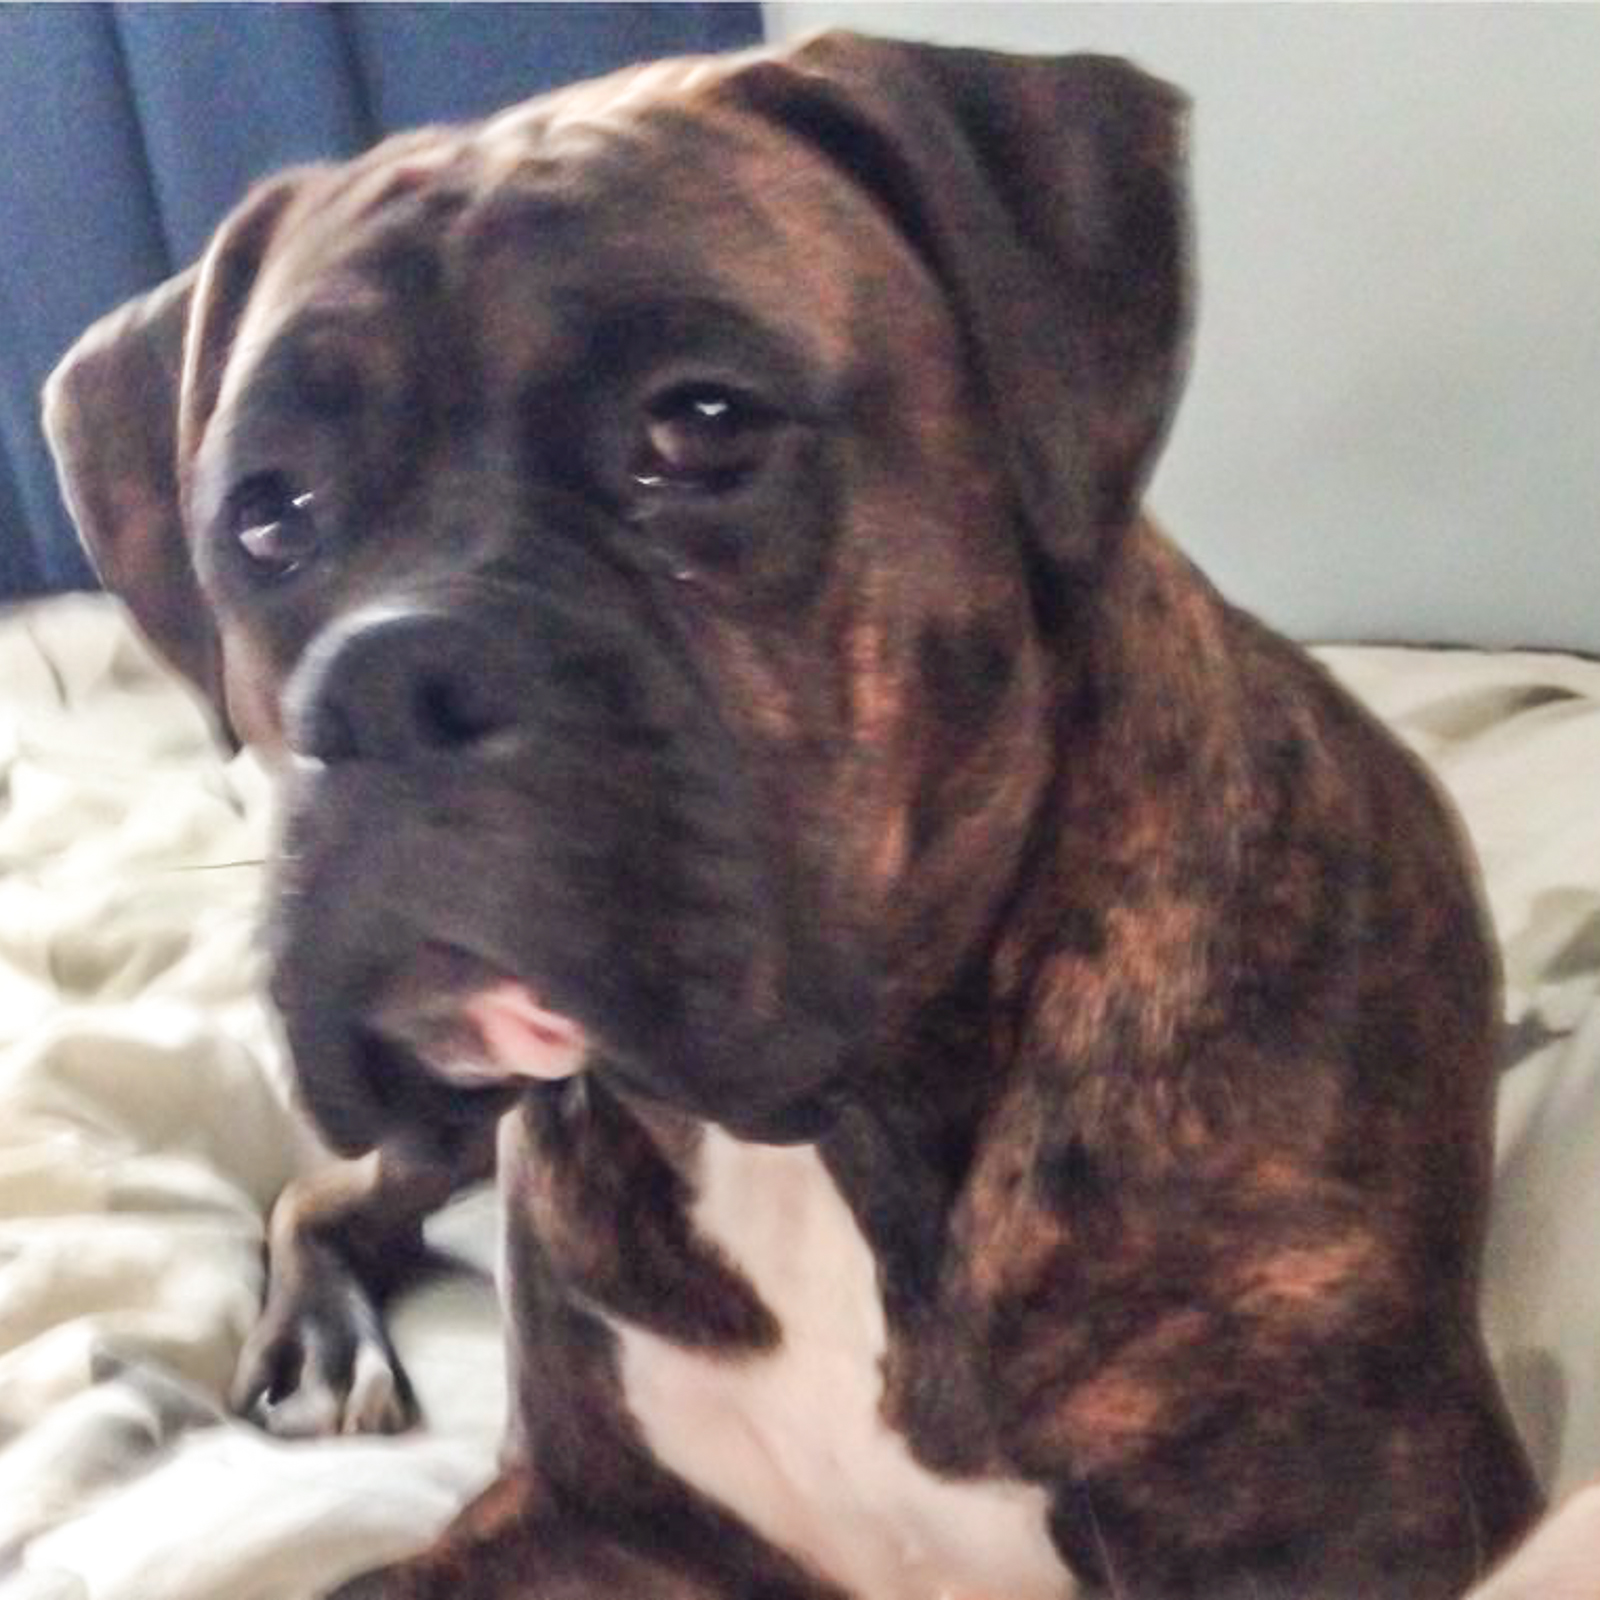 Lost, Missing Dog - Boxer - Canton, OH, USA 44706 on ...